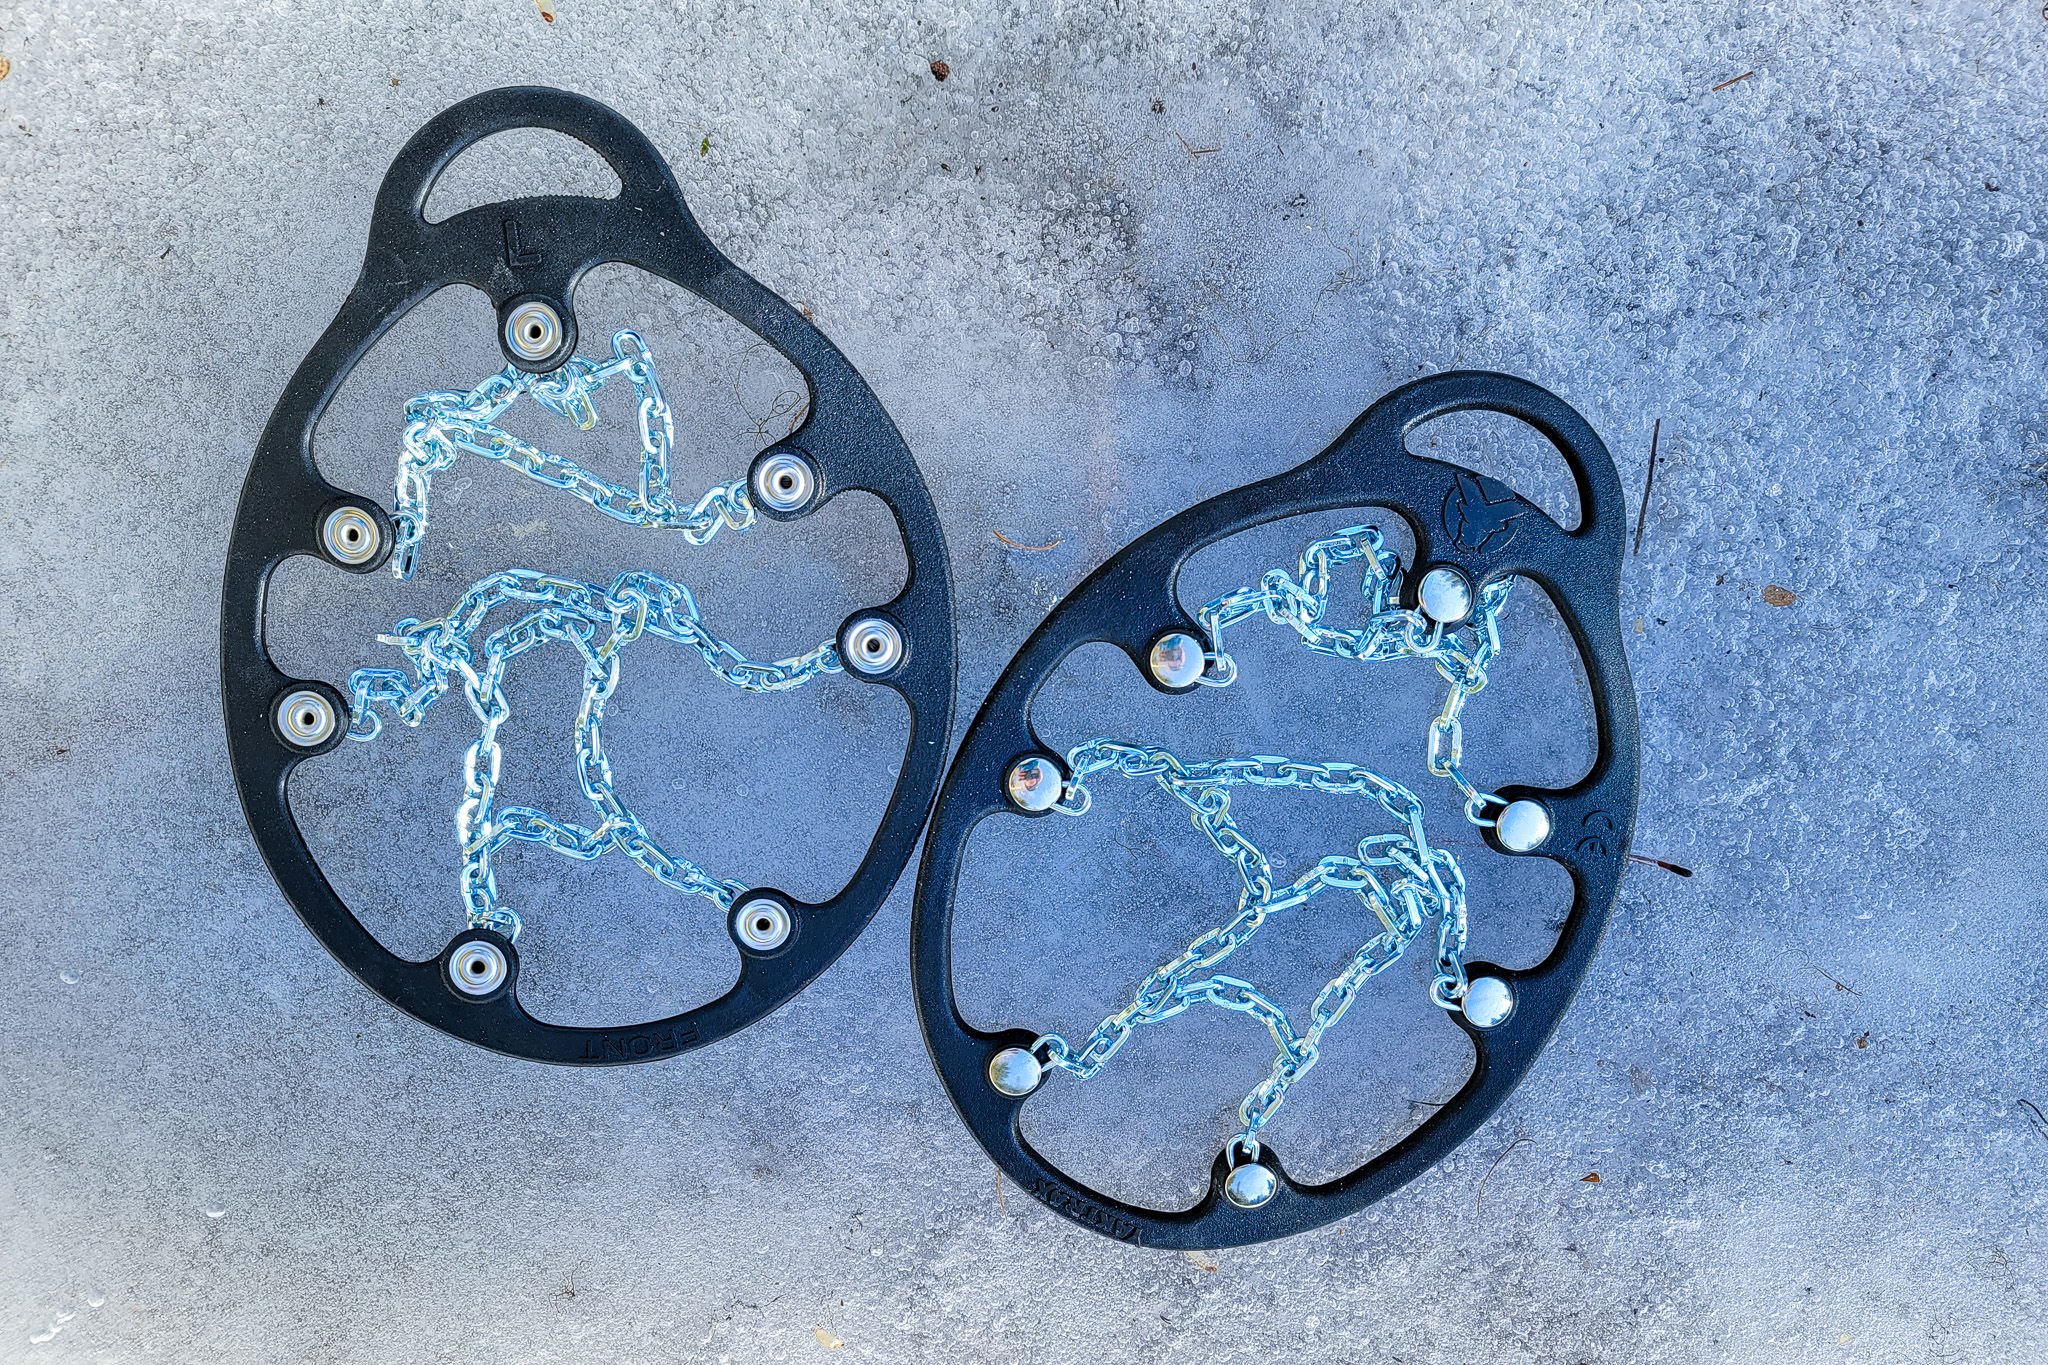 Closeup of the Yaktrax Chains on any icy surface